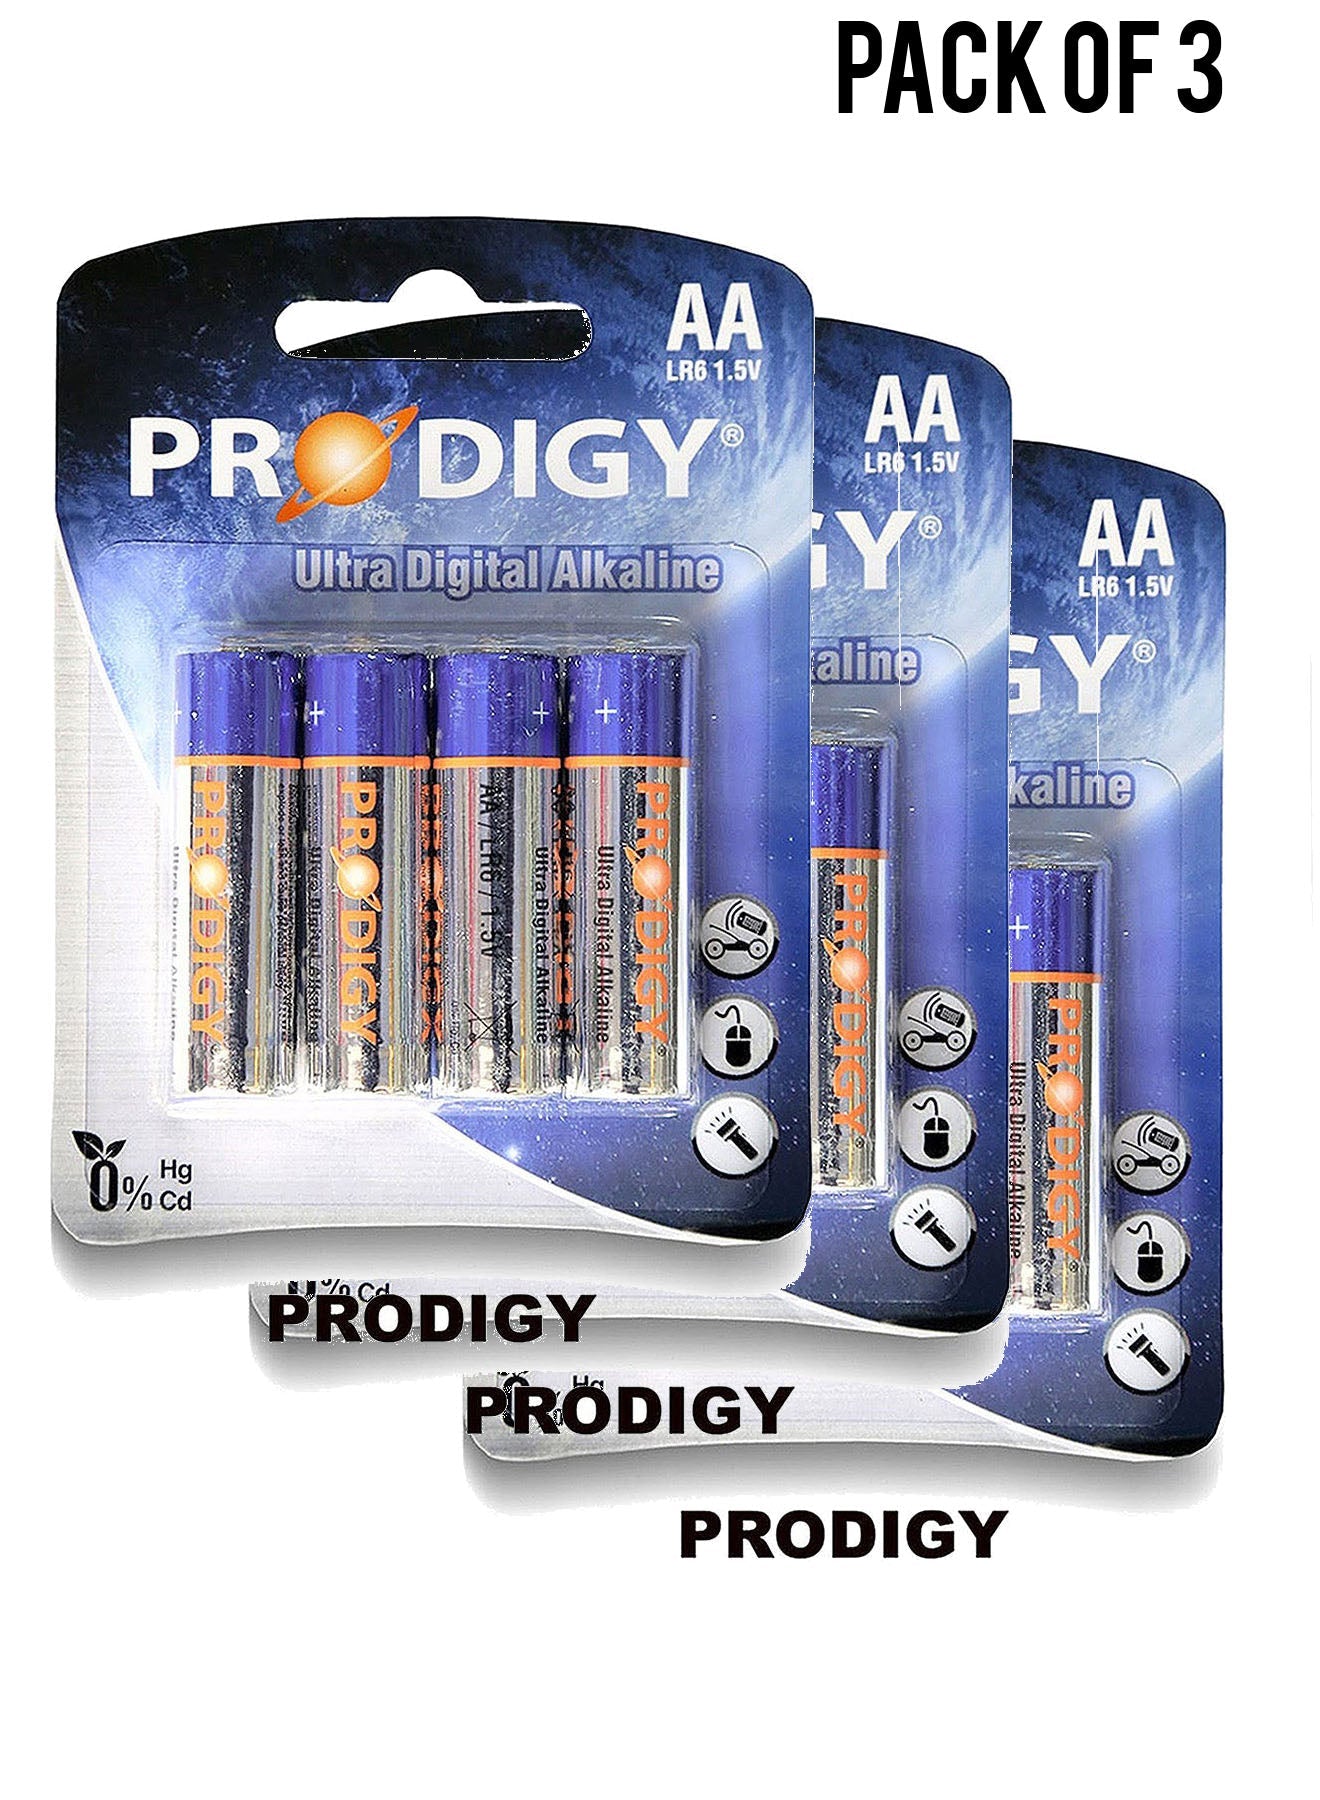 Prodigy Alkaline LR6UD AA4 Value Pack of 3 